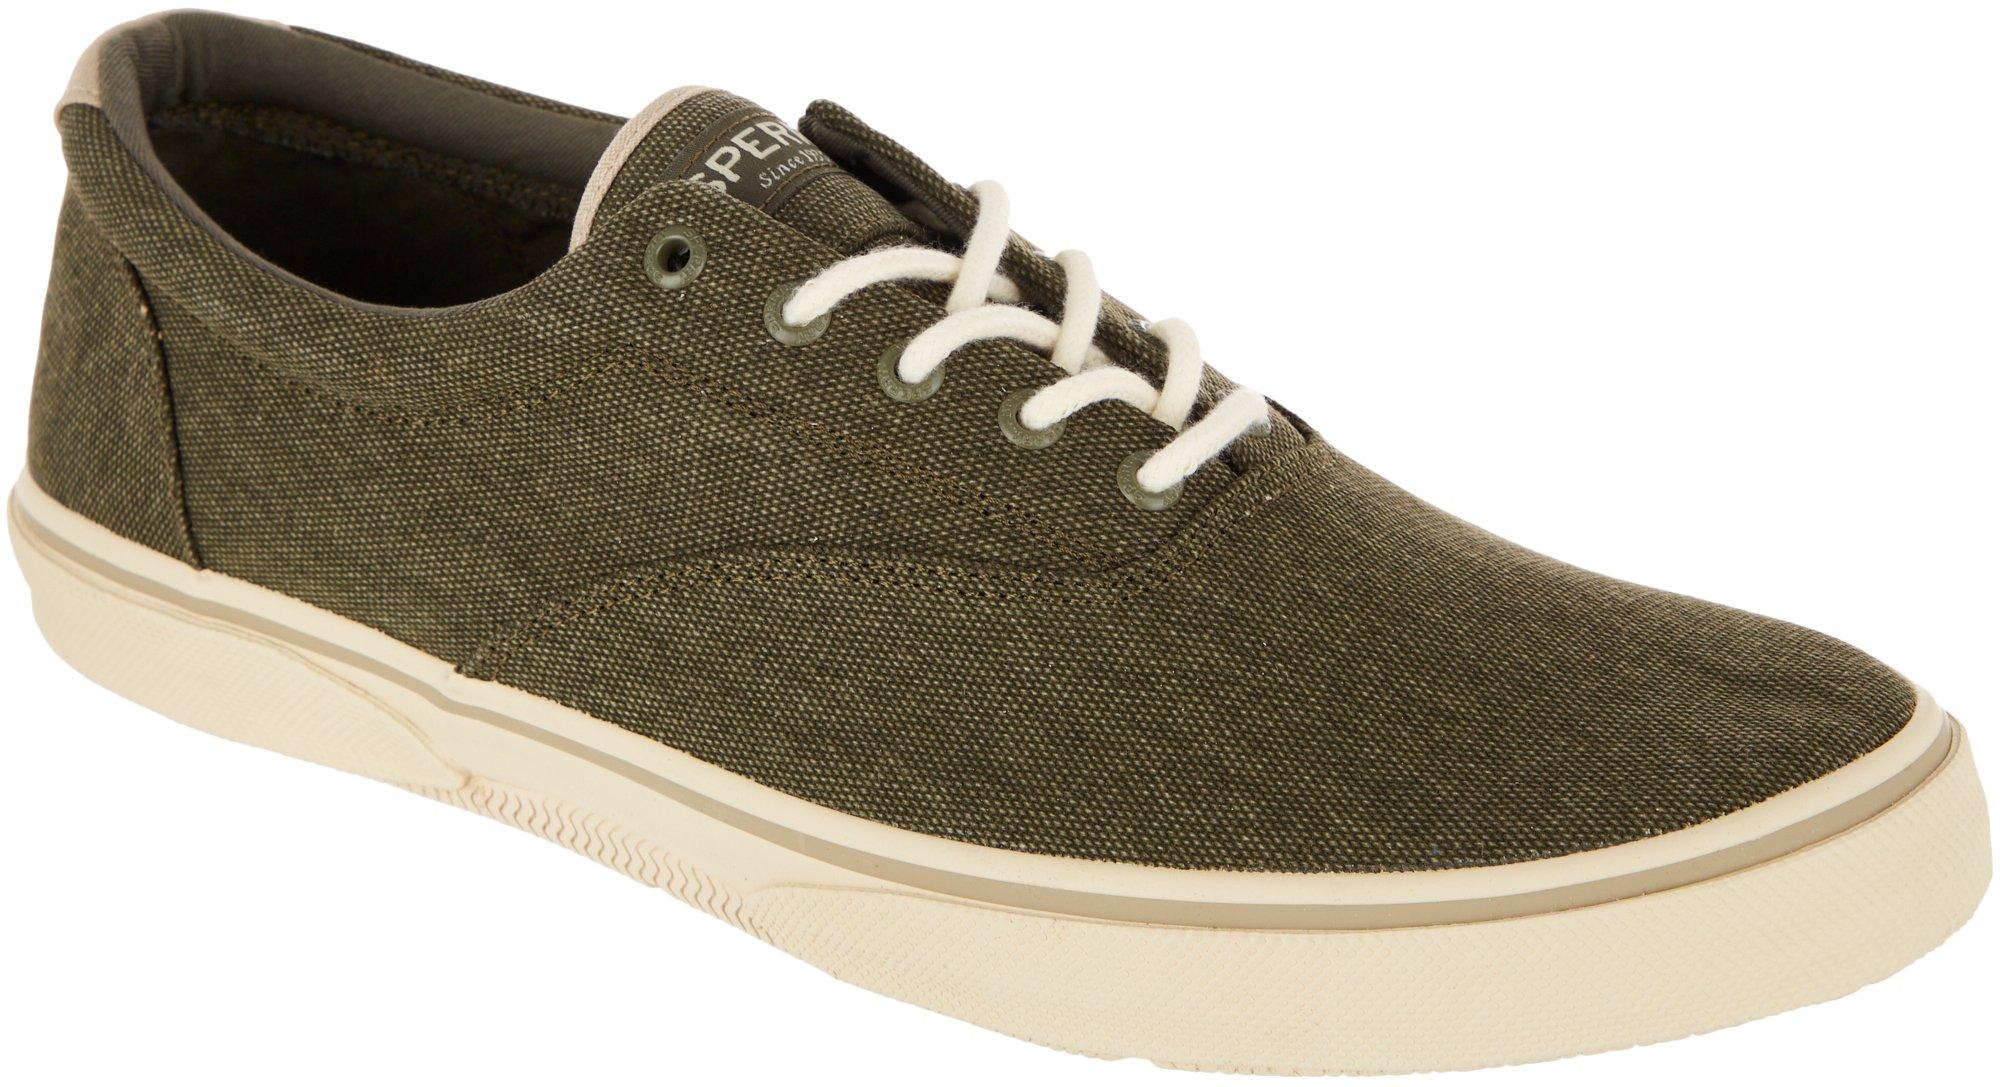 Men's Solid Canvas Casual Sneakers